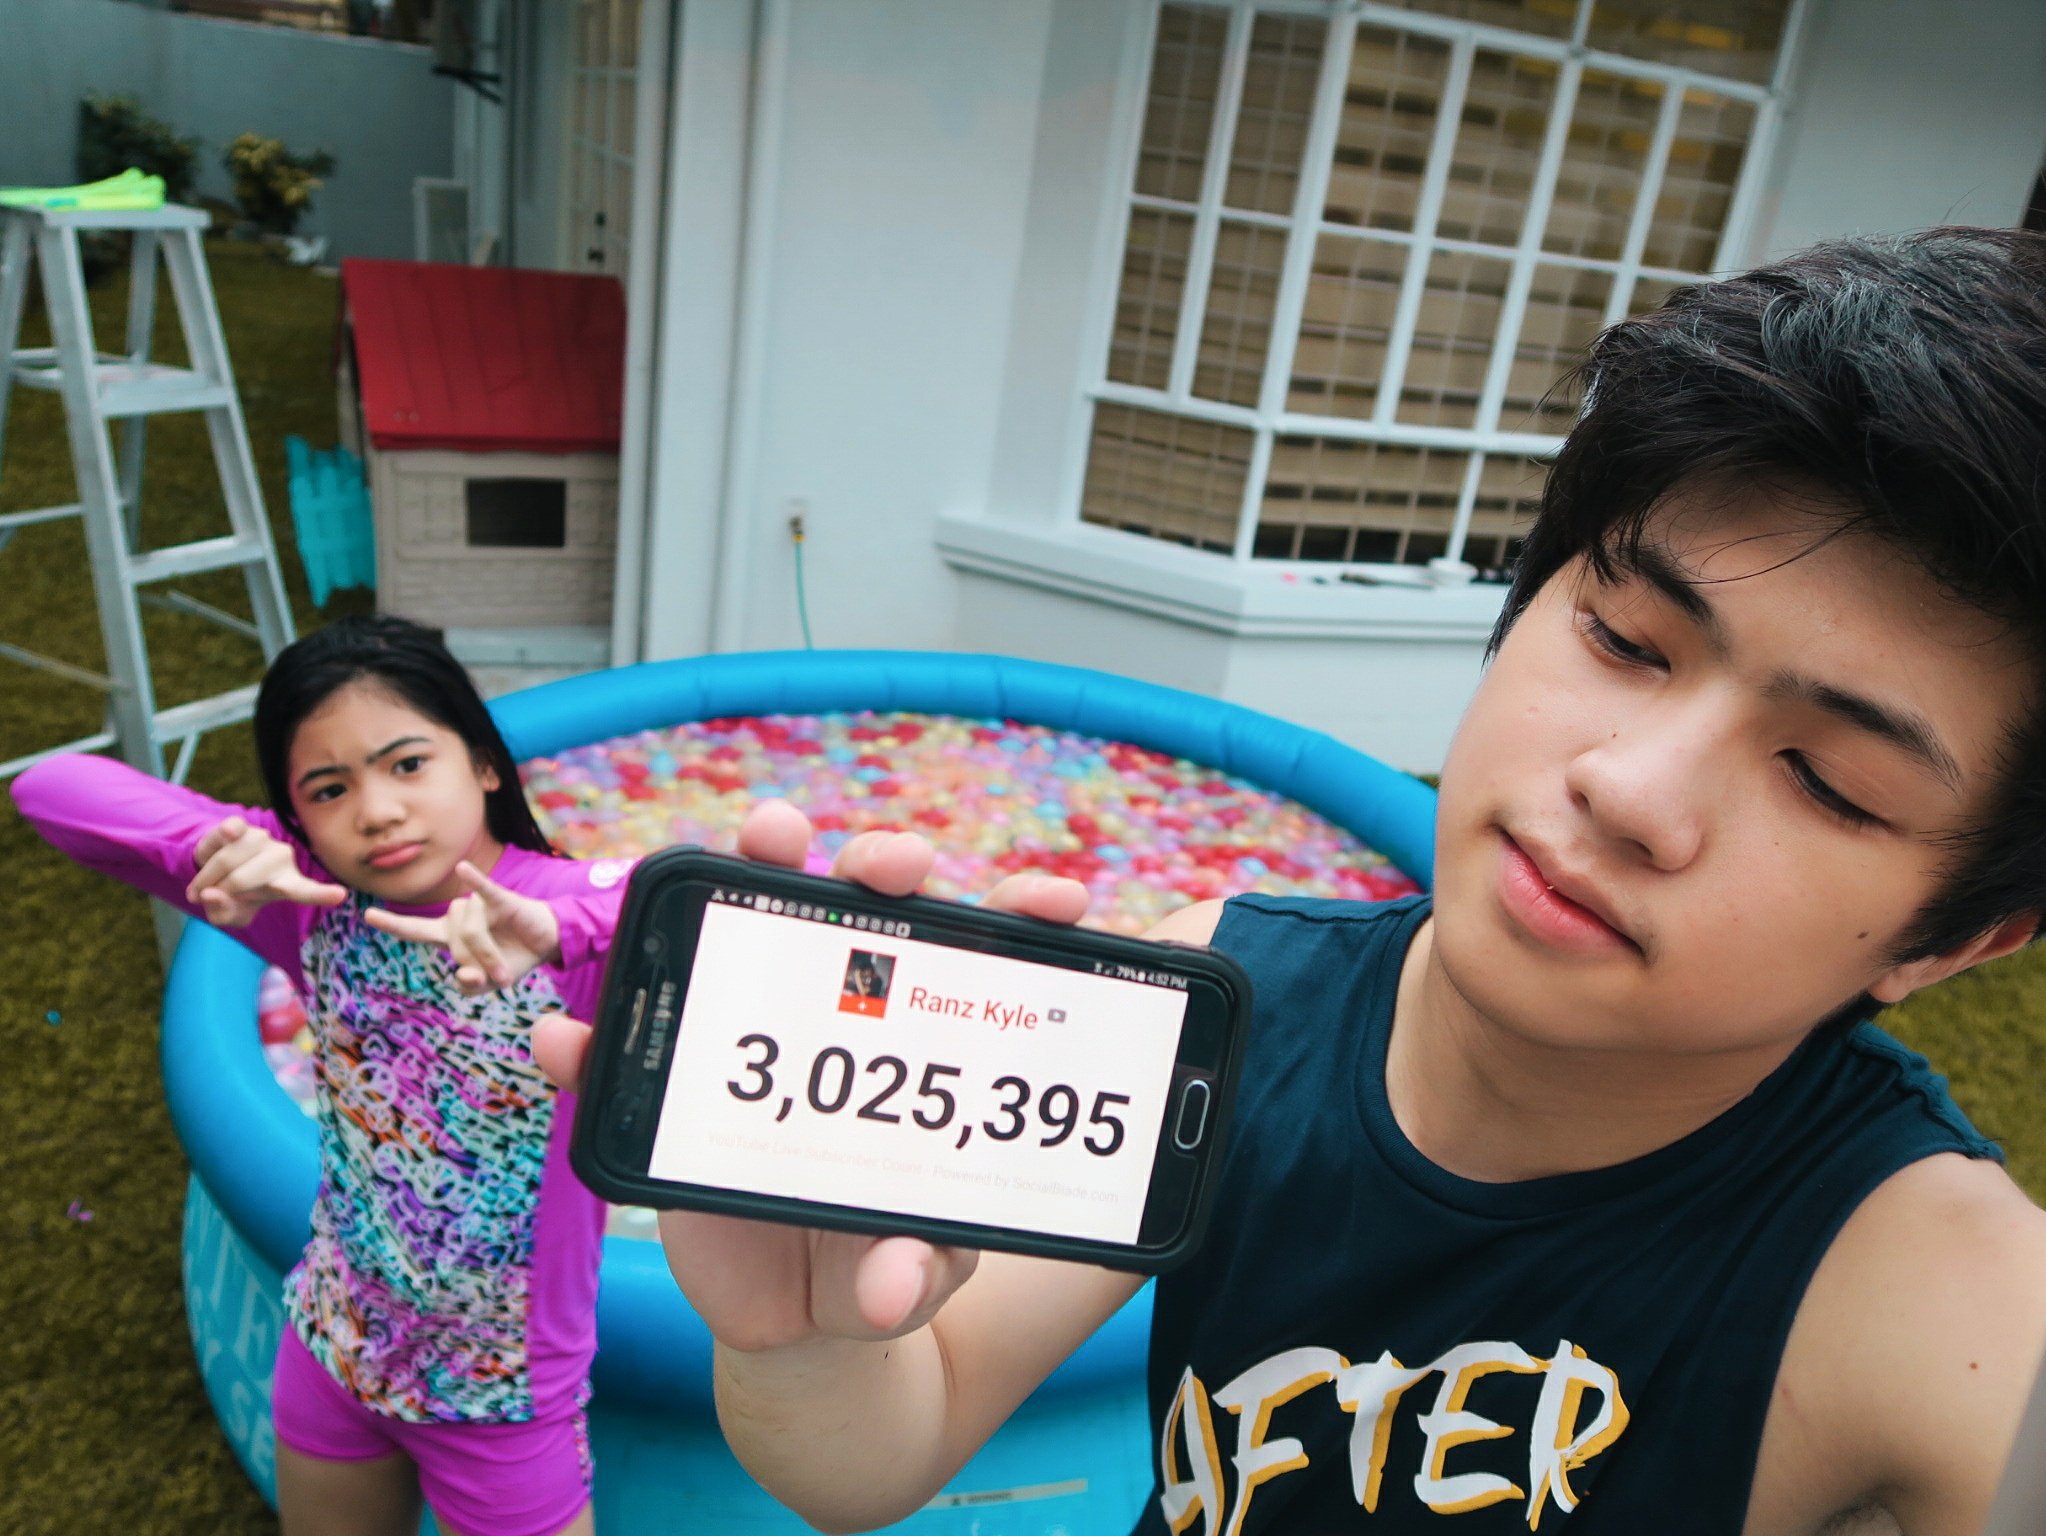 Ranz Kyle on Twitter "We are now 3M Subs fam This is insane